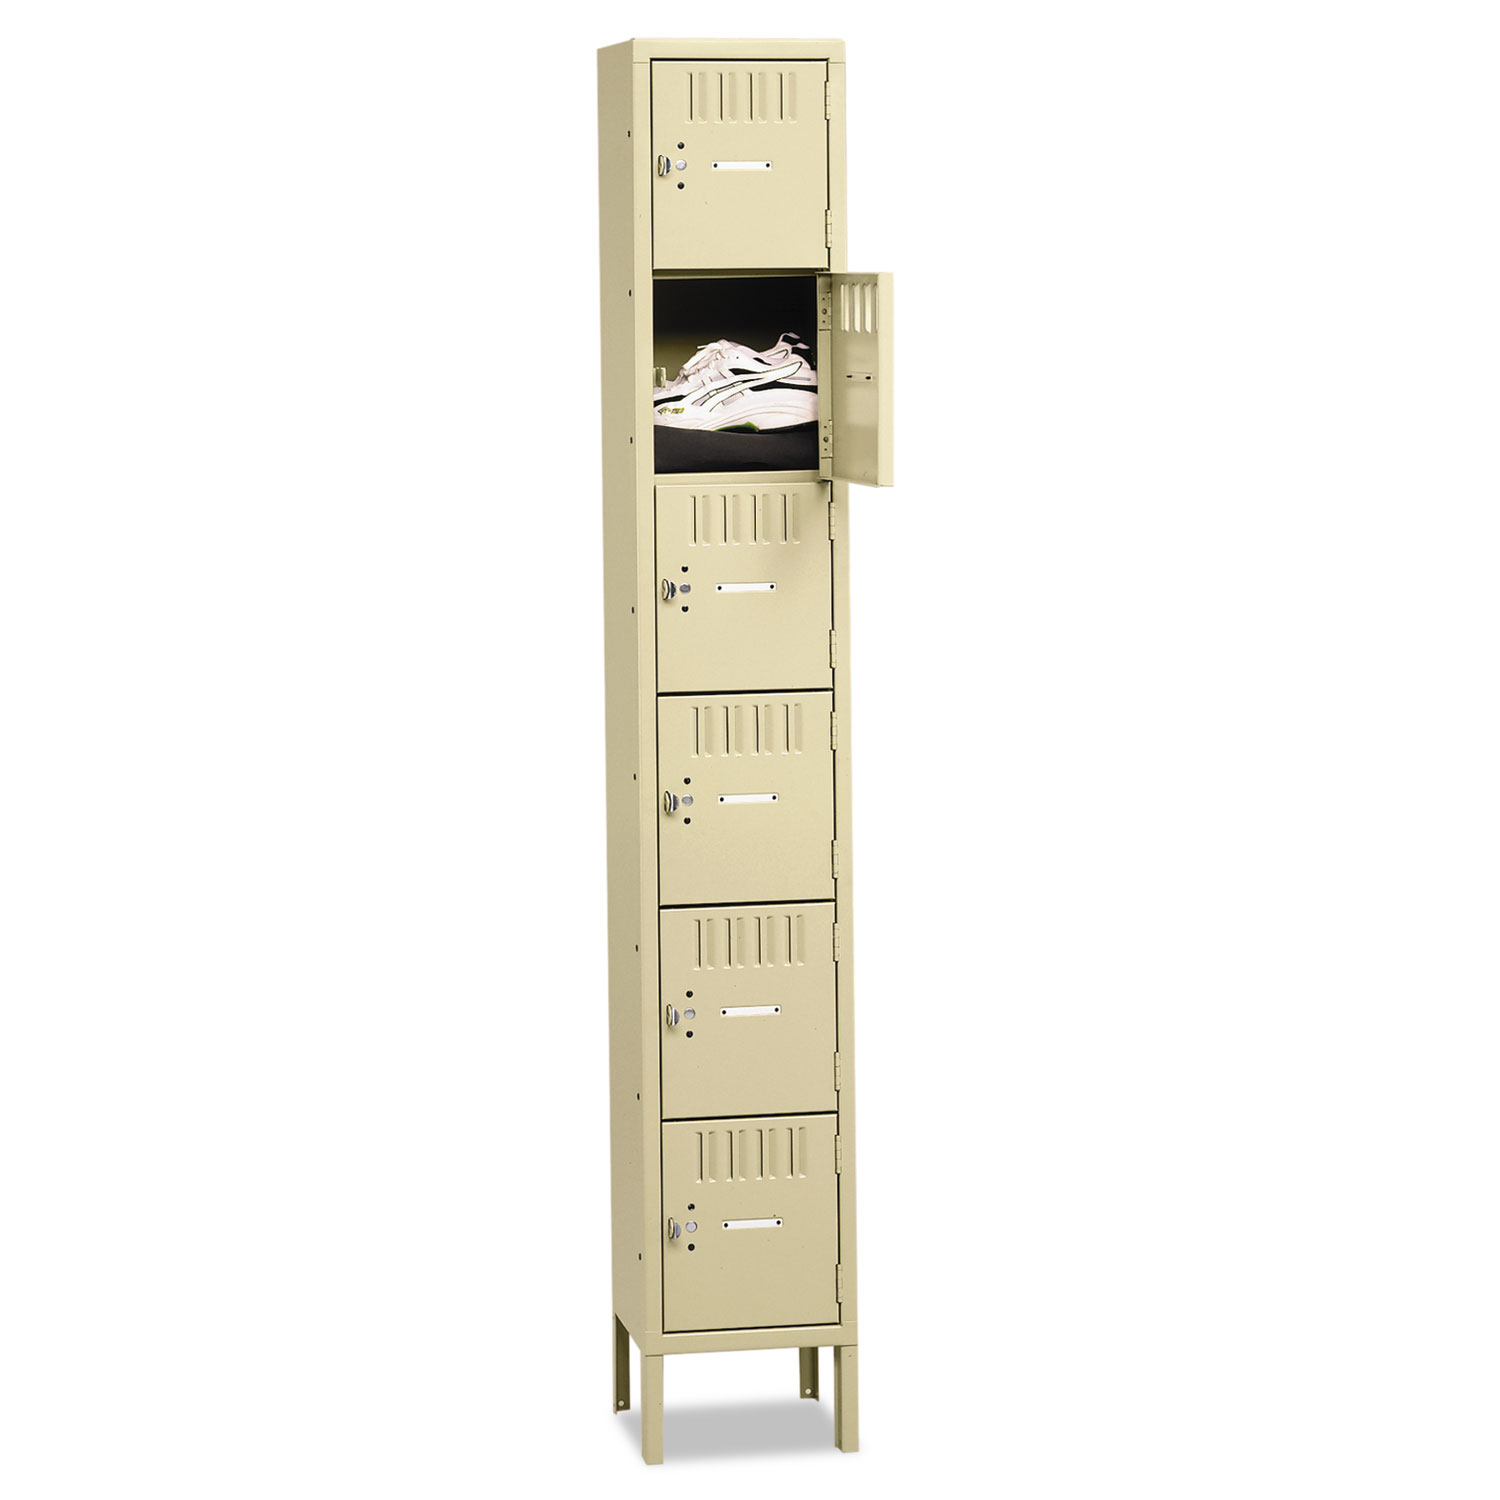 Box Compartments with Legs, Single Stack, 12w x 18d x 78h, Sand